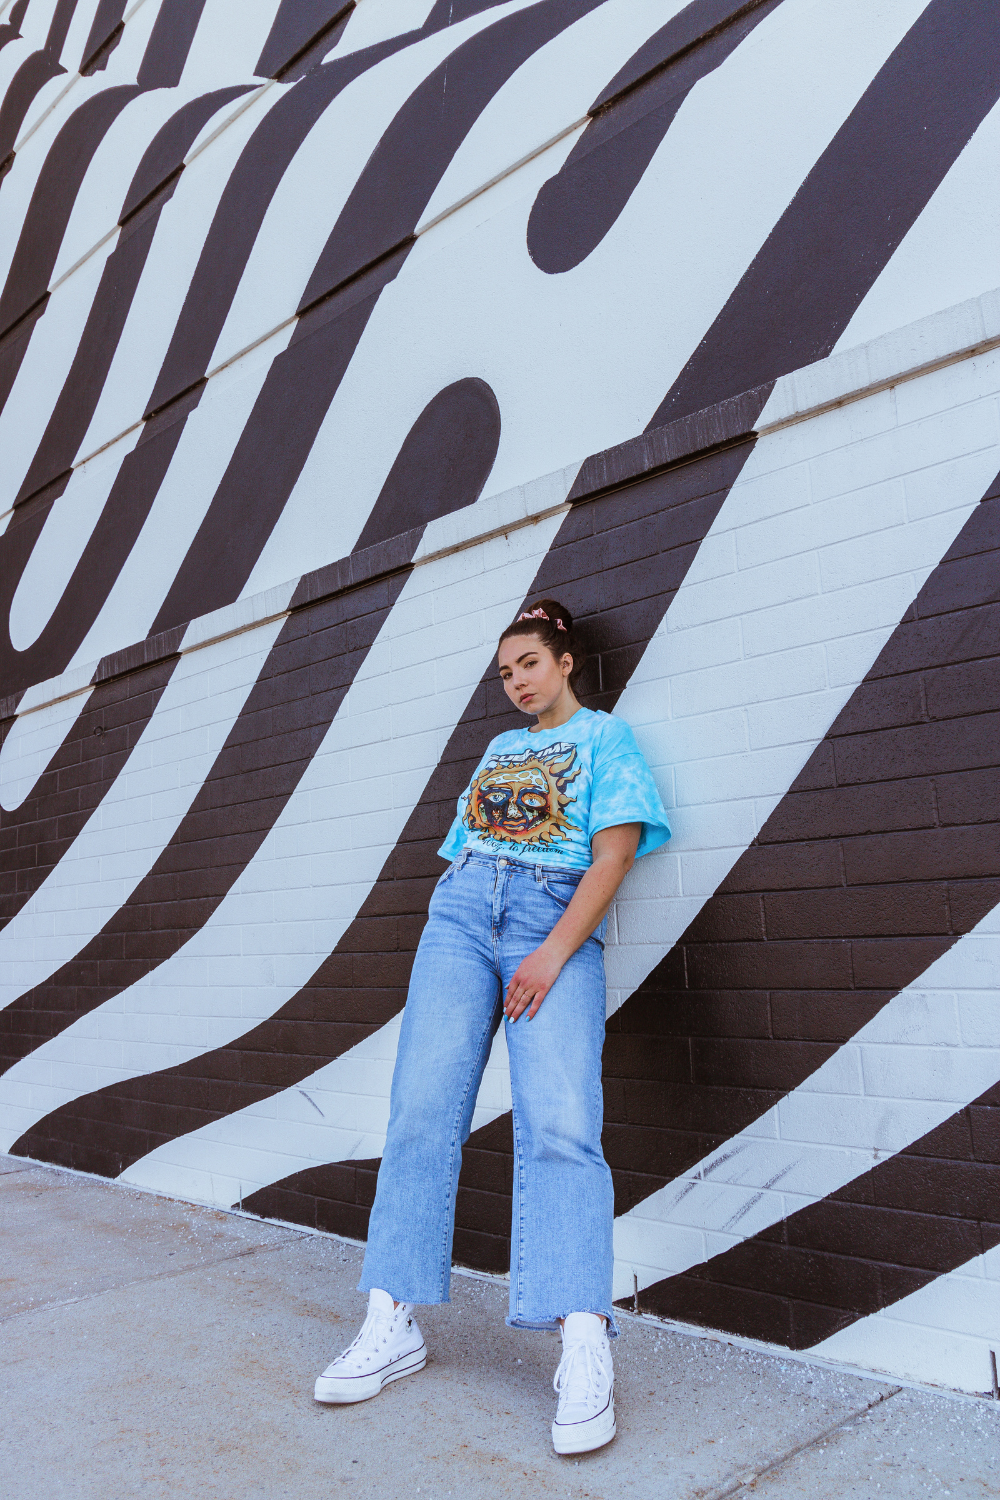 A white and black striped mural in Salt Lake City is behind influencer Lauryncakes as she poses in converse, wide leg jeans, and a band tshirt for her Spring outfit